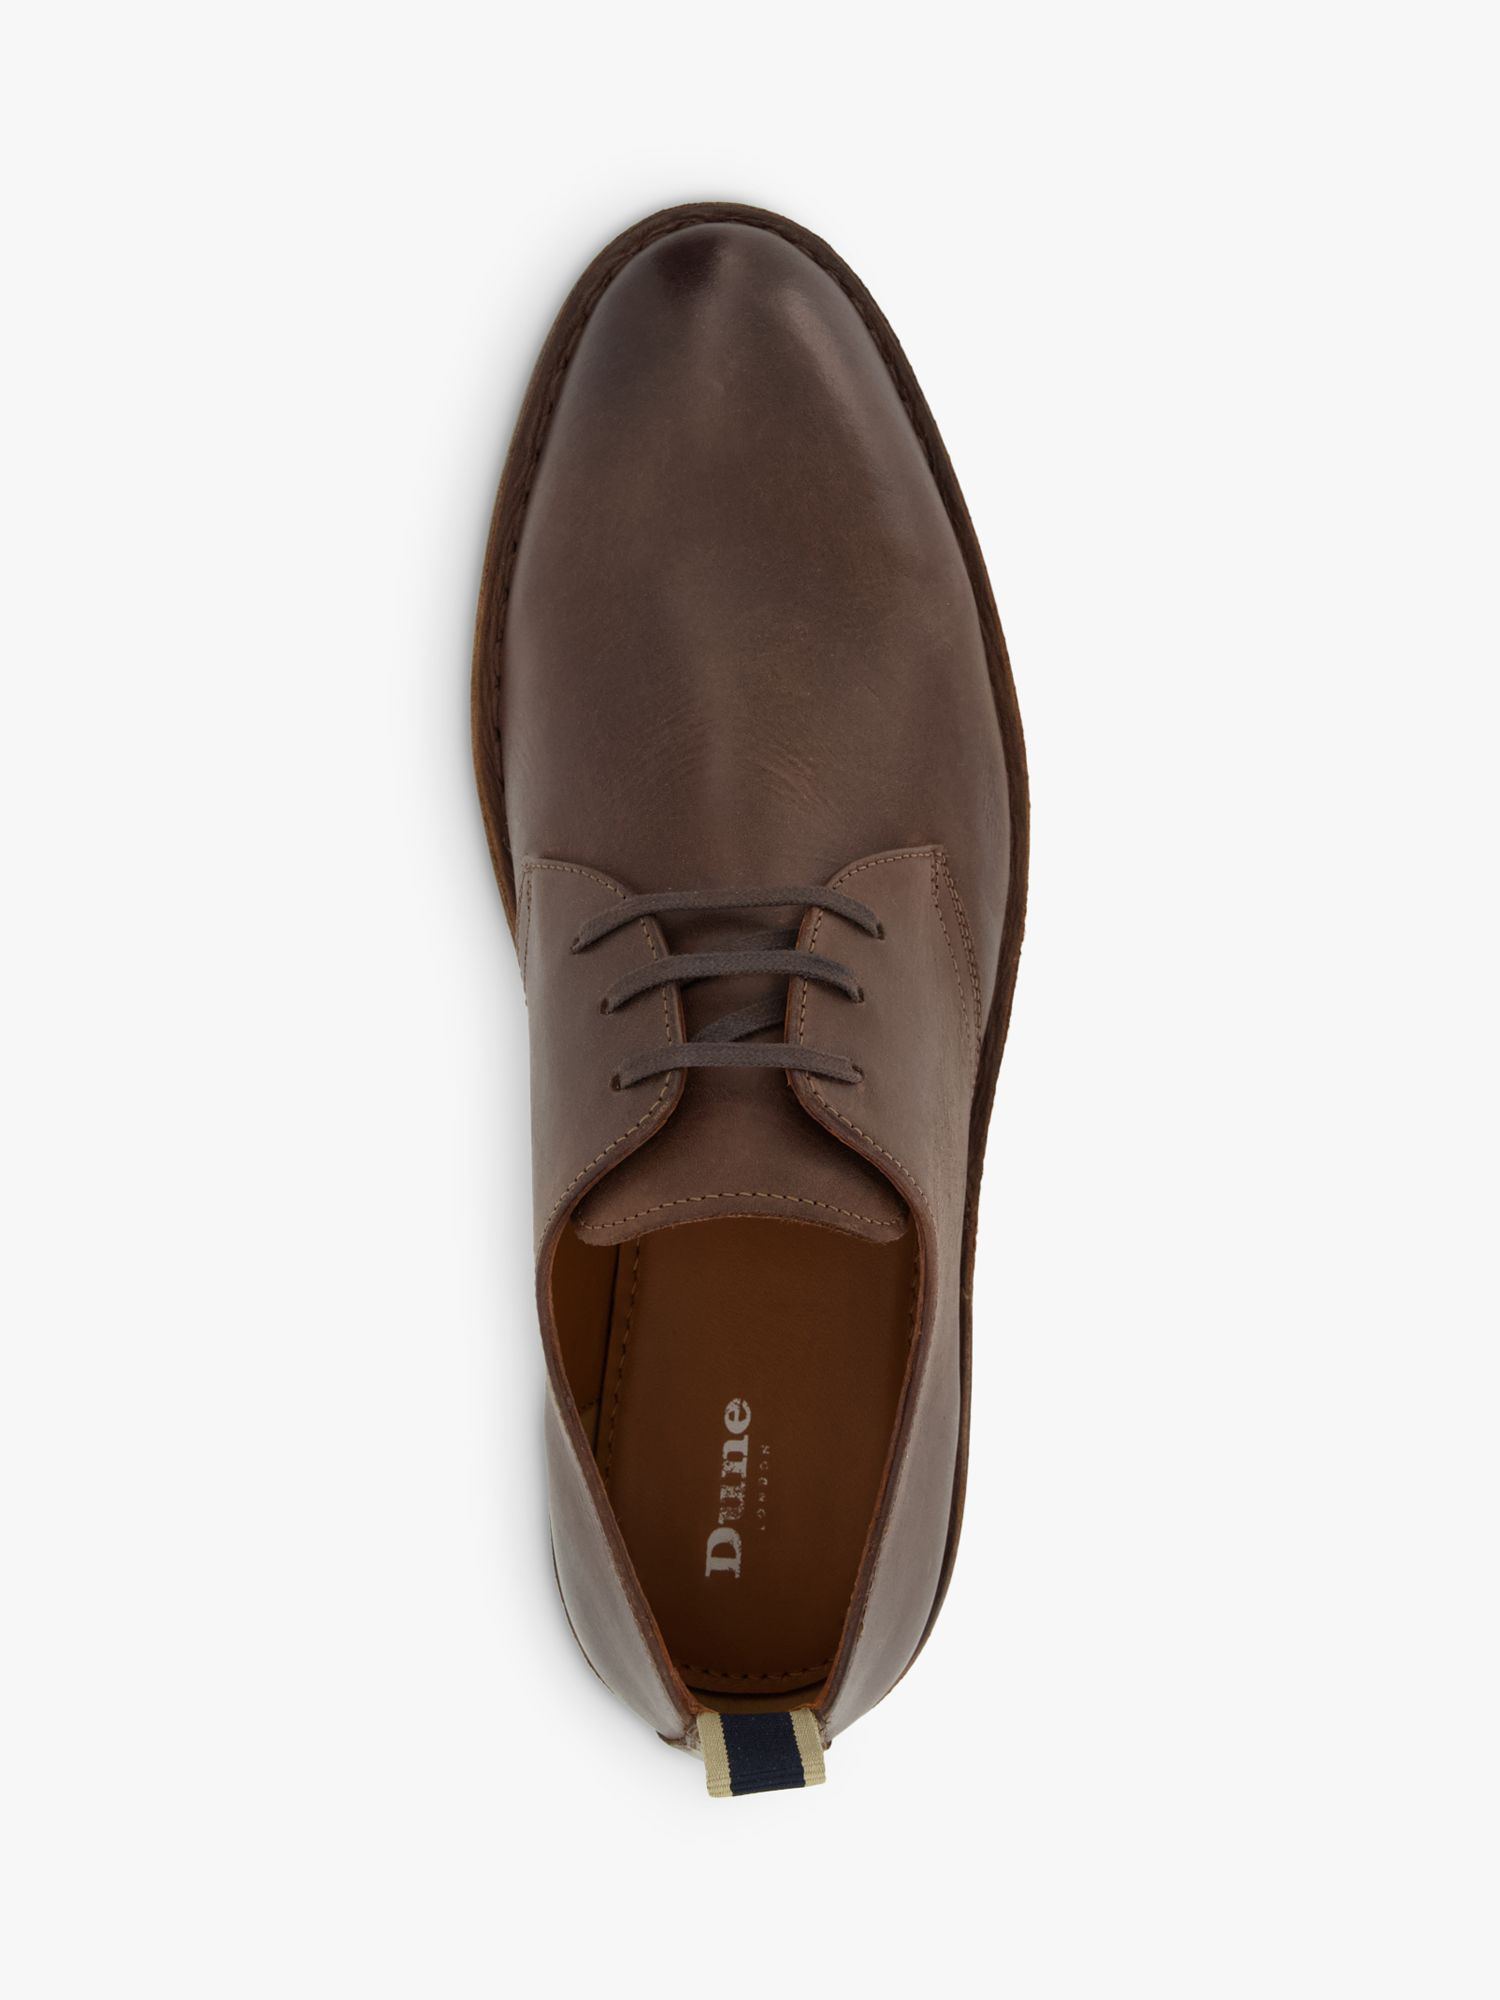 Dune Brooked Leather Chukka Shoes, Brown-leather, EU43